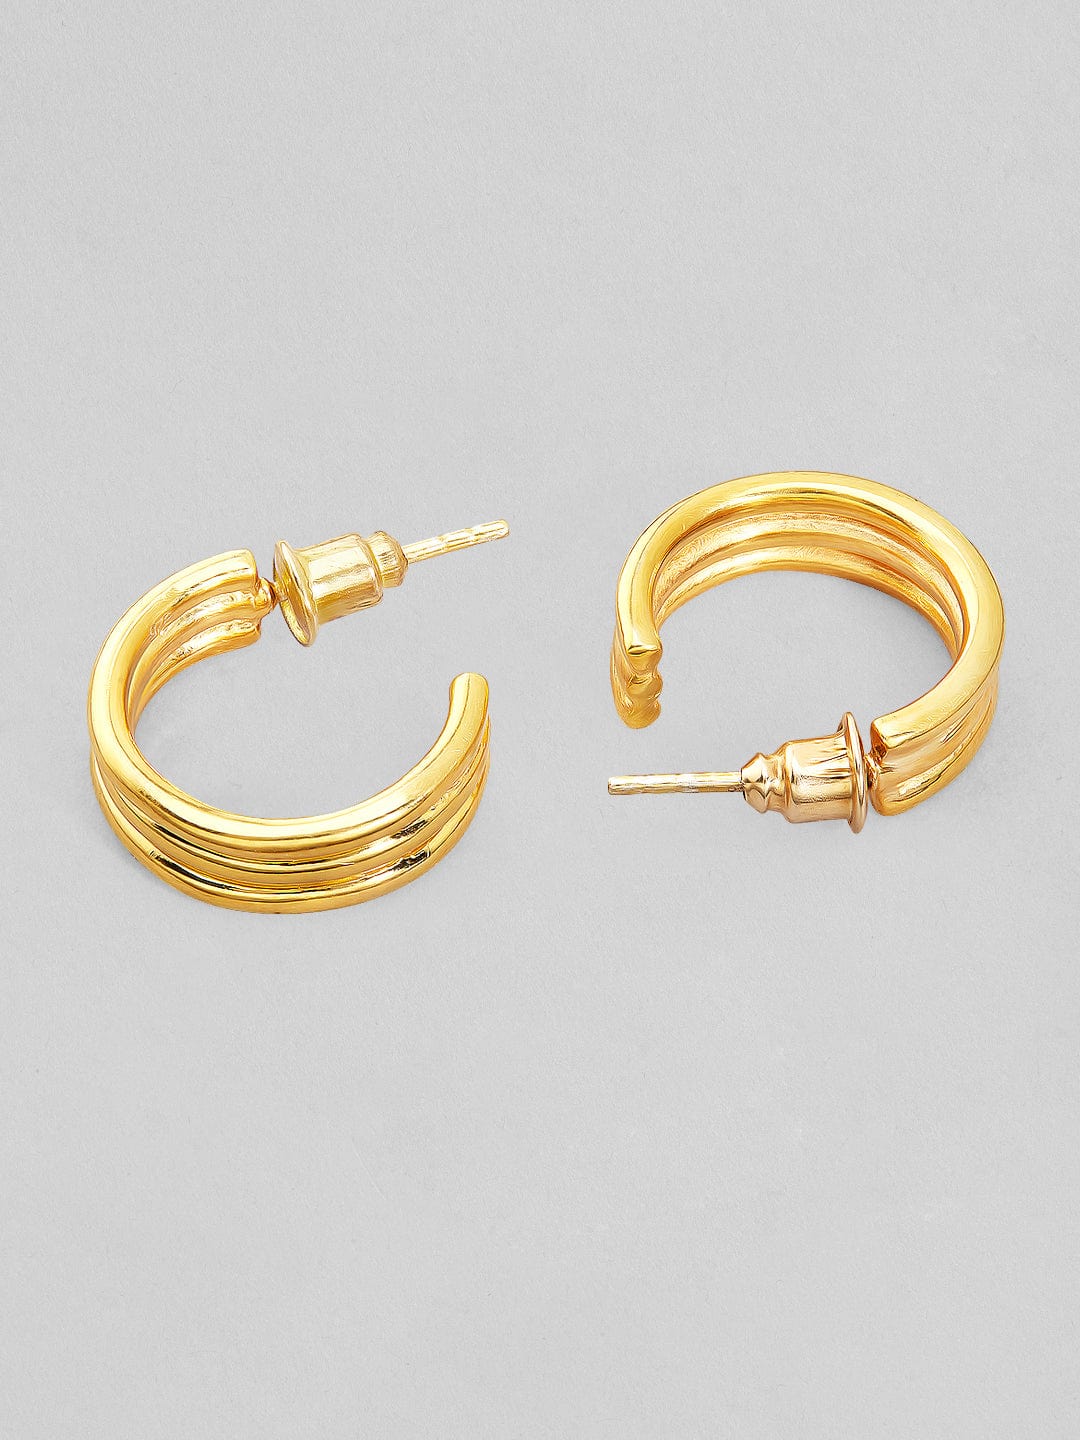 Rubans 925 Silver The Offset Classic Hoop Earrings.- Gold Plated Earrings